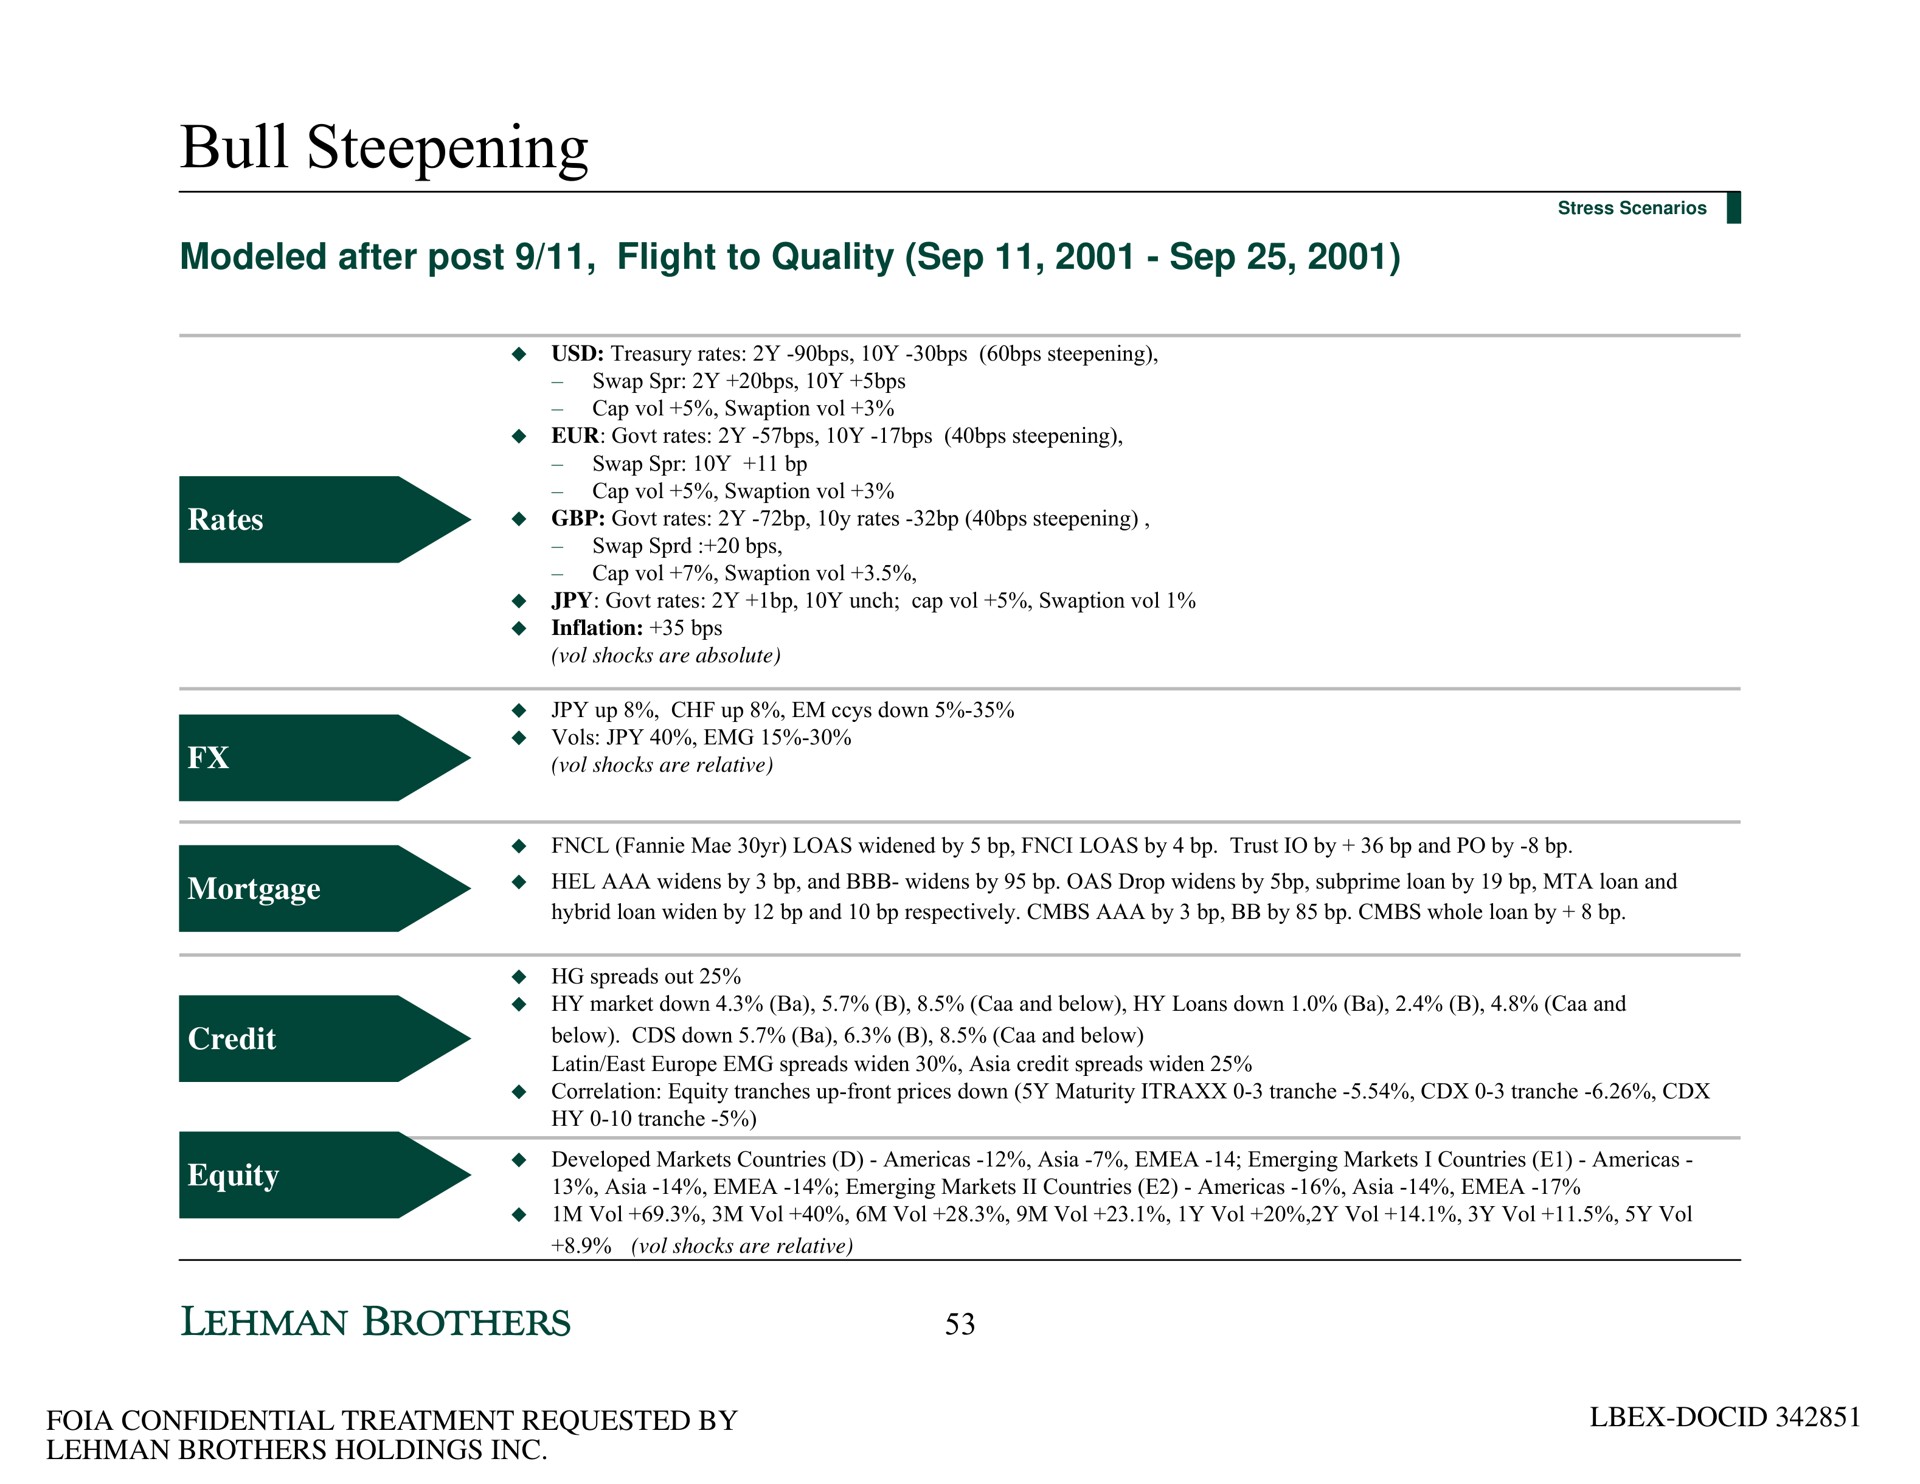 bull steepening modeled after post flight to quality | Lehman Brothers